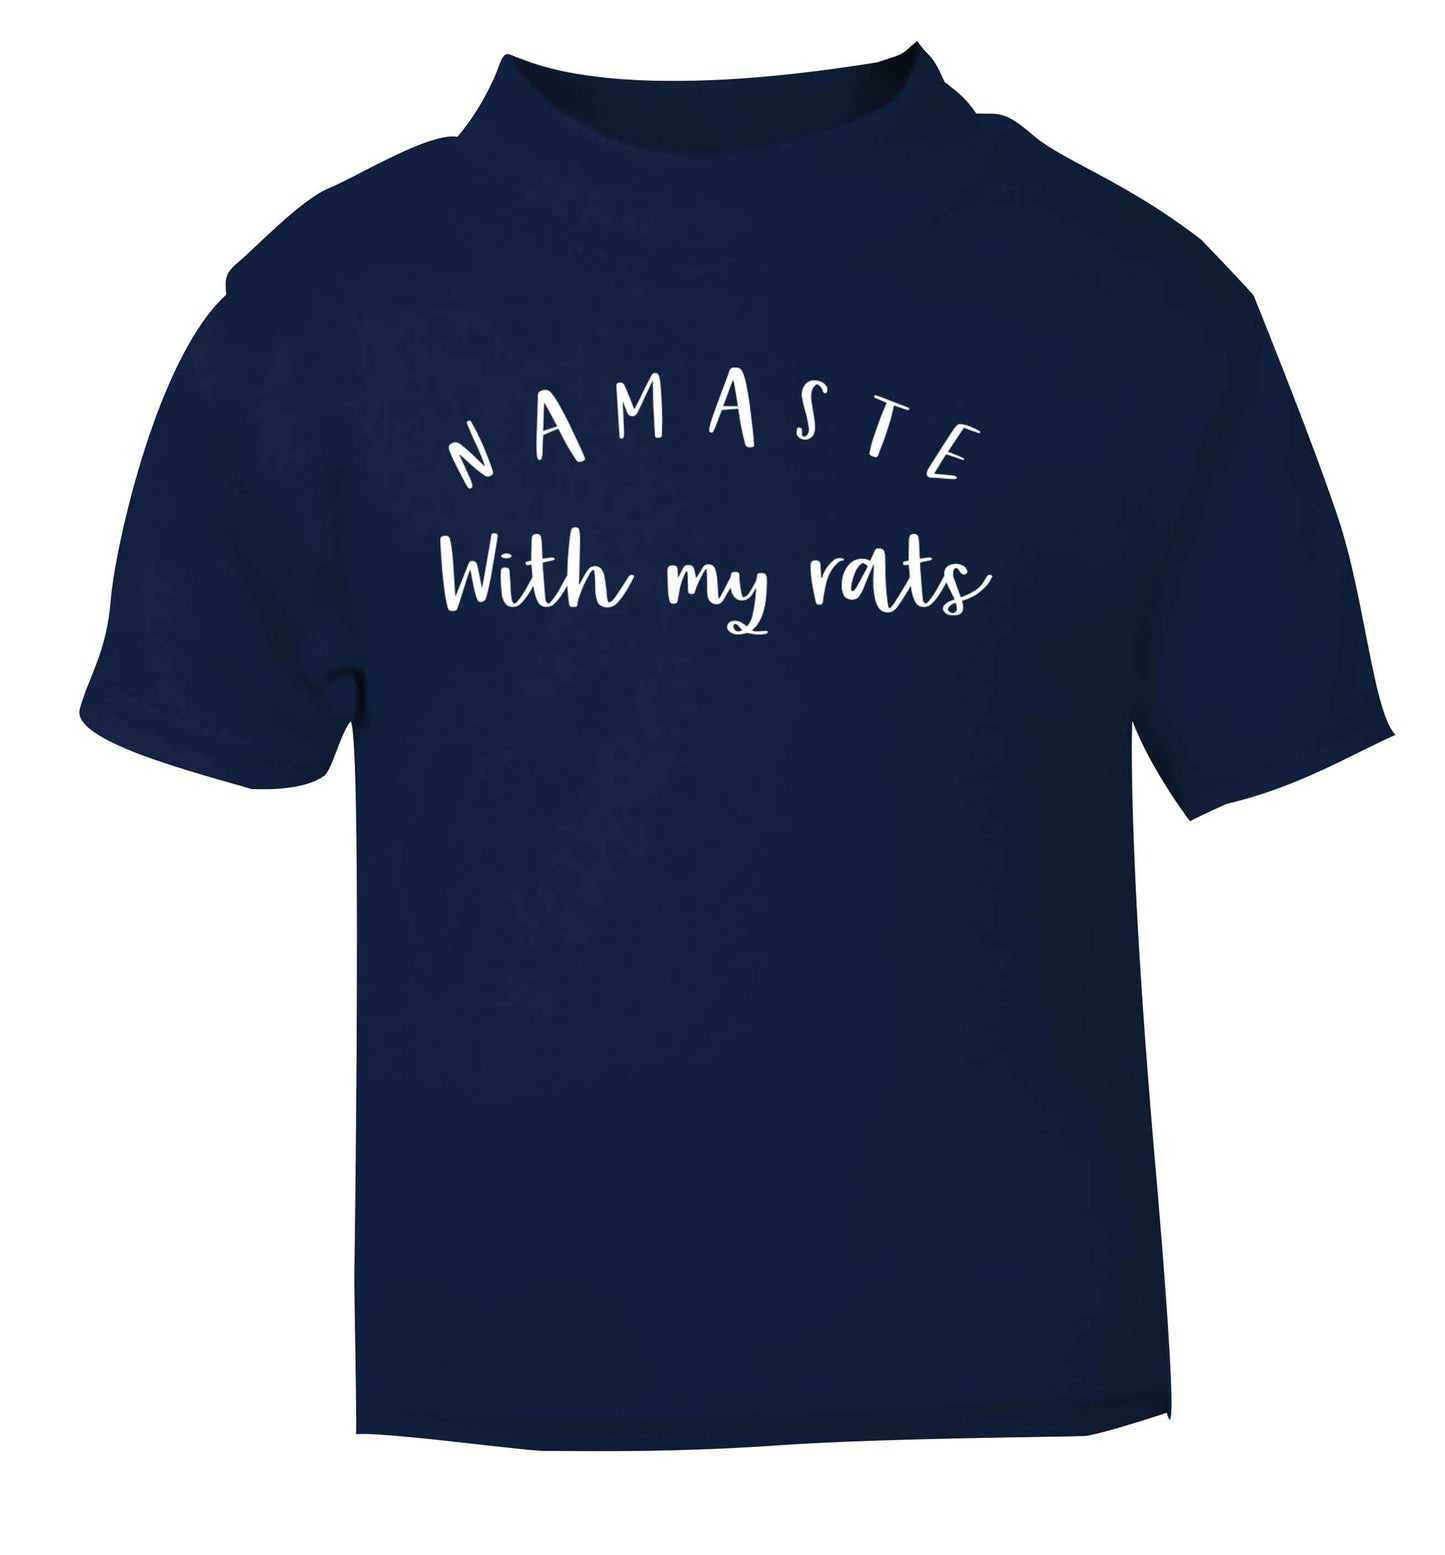 Namaste with my rats navy Baby Toddler Tshirt 2 Years